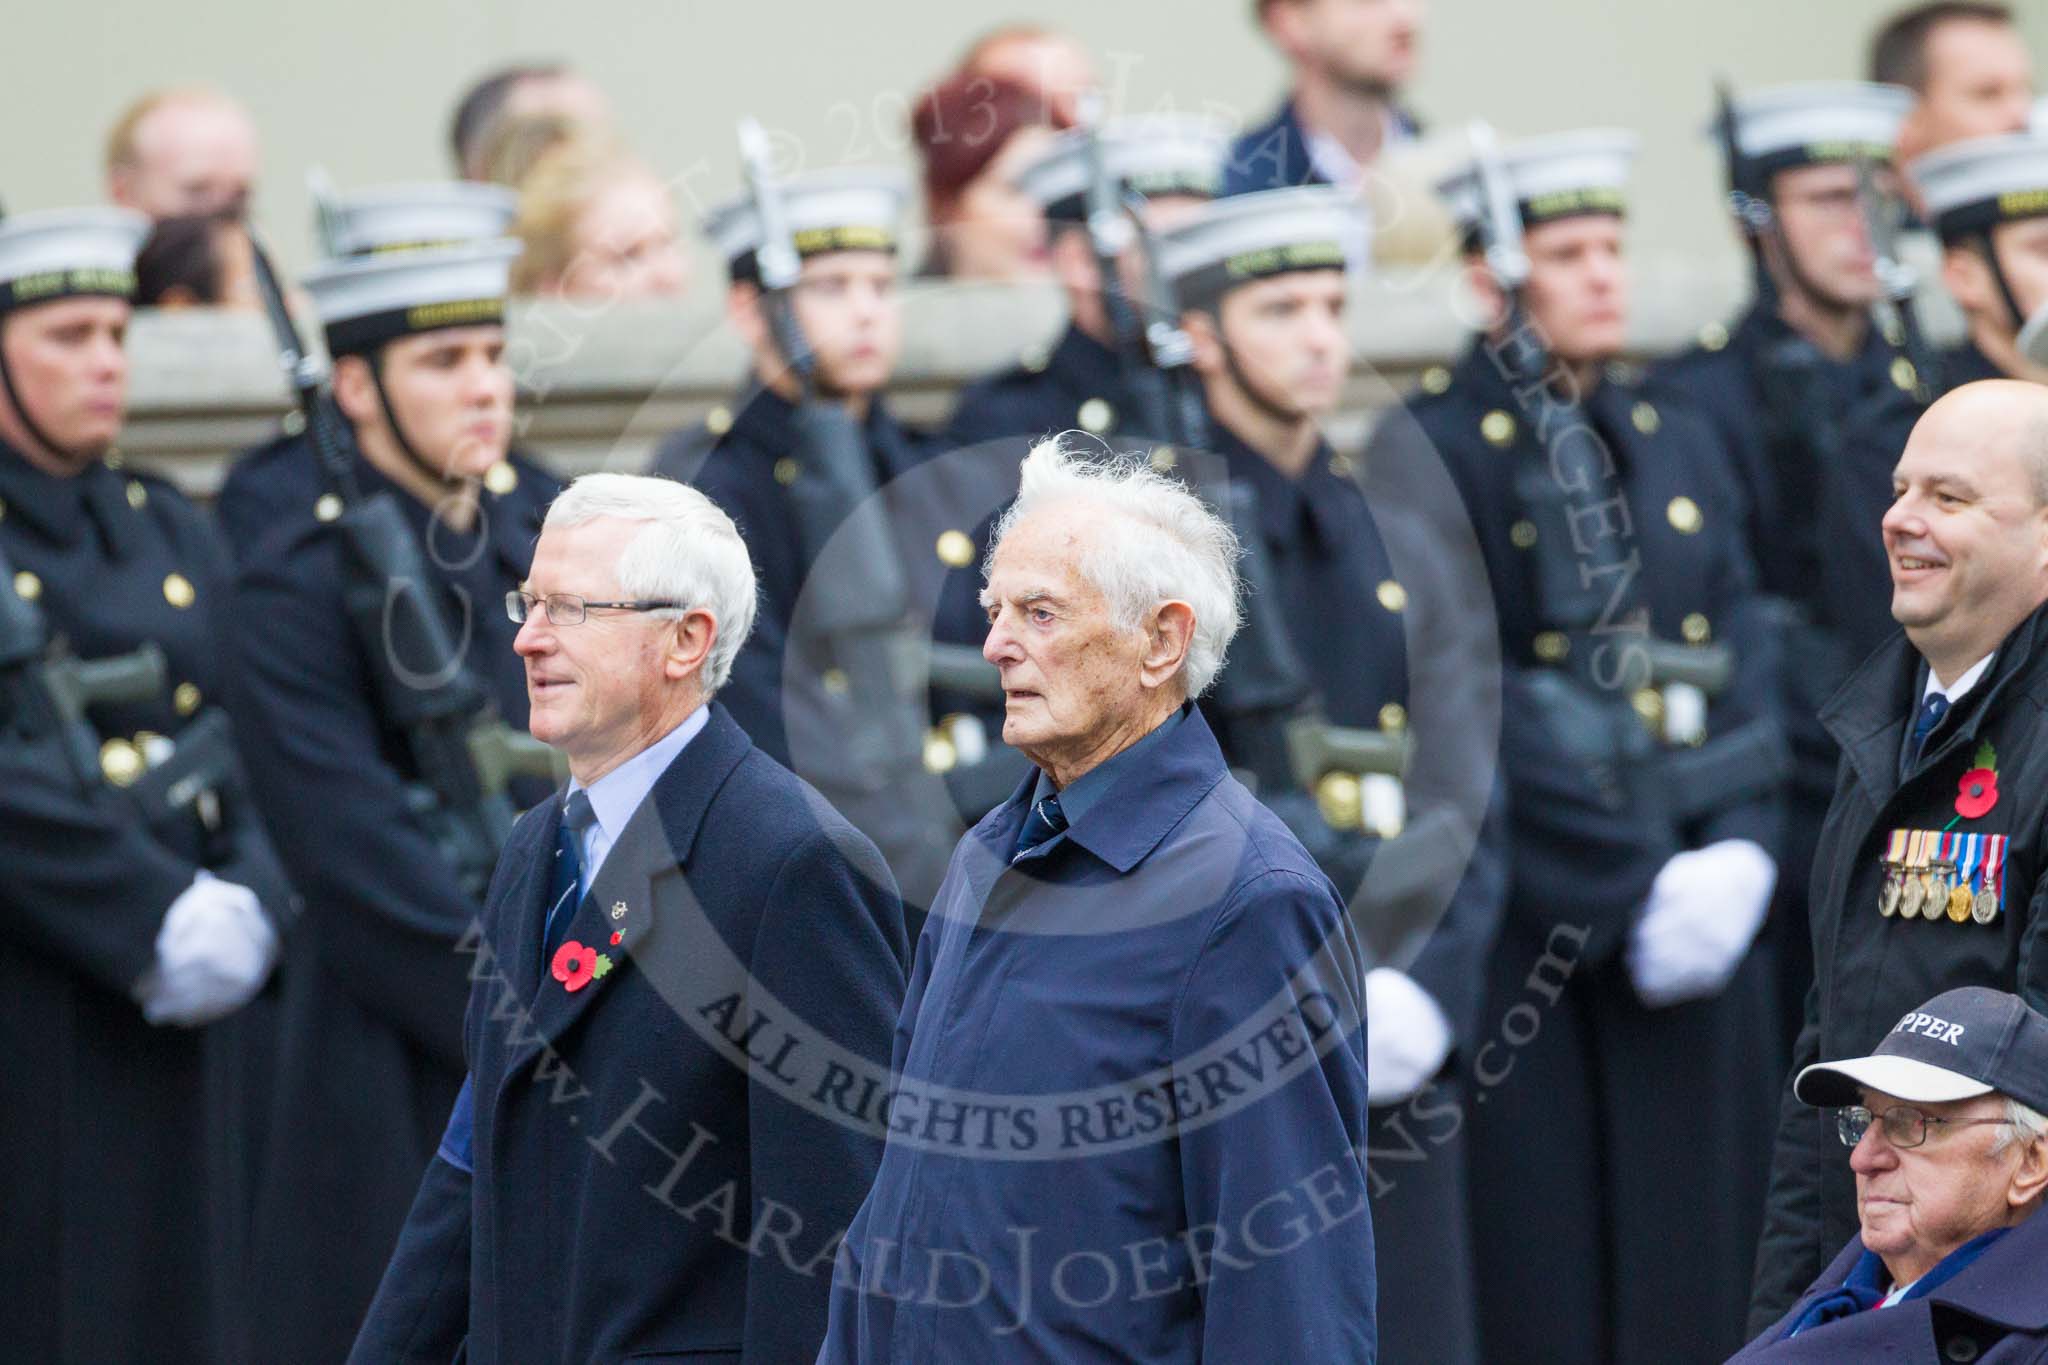 Remembrance Sunday at the Cenotaph 2015: Group C3, Royal Air Forces Ex-Prisoner's of War Association.
Cenotaph, Whitehall, London SW1,
London,
Greater London,
United Kingdom,
on 08 November 2015 at 11:47, image #438